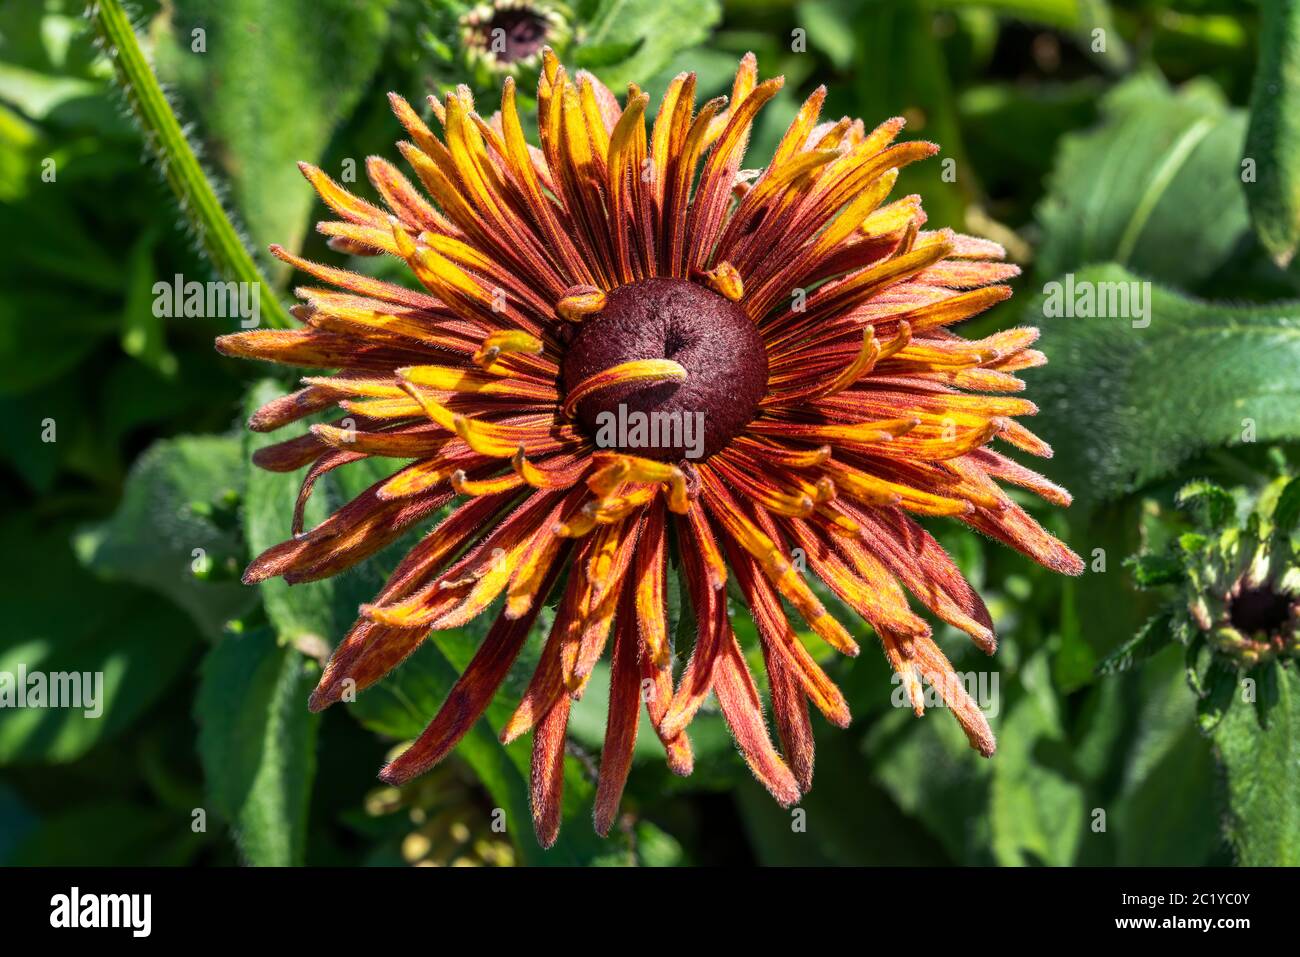 Rudbeckia hirta 'Chim Chiminee' a yellow orange red herbaceous perennial summer autumn flower plant commonly known as Black Eyed Susan or Coneflower s Stock Photo